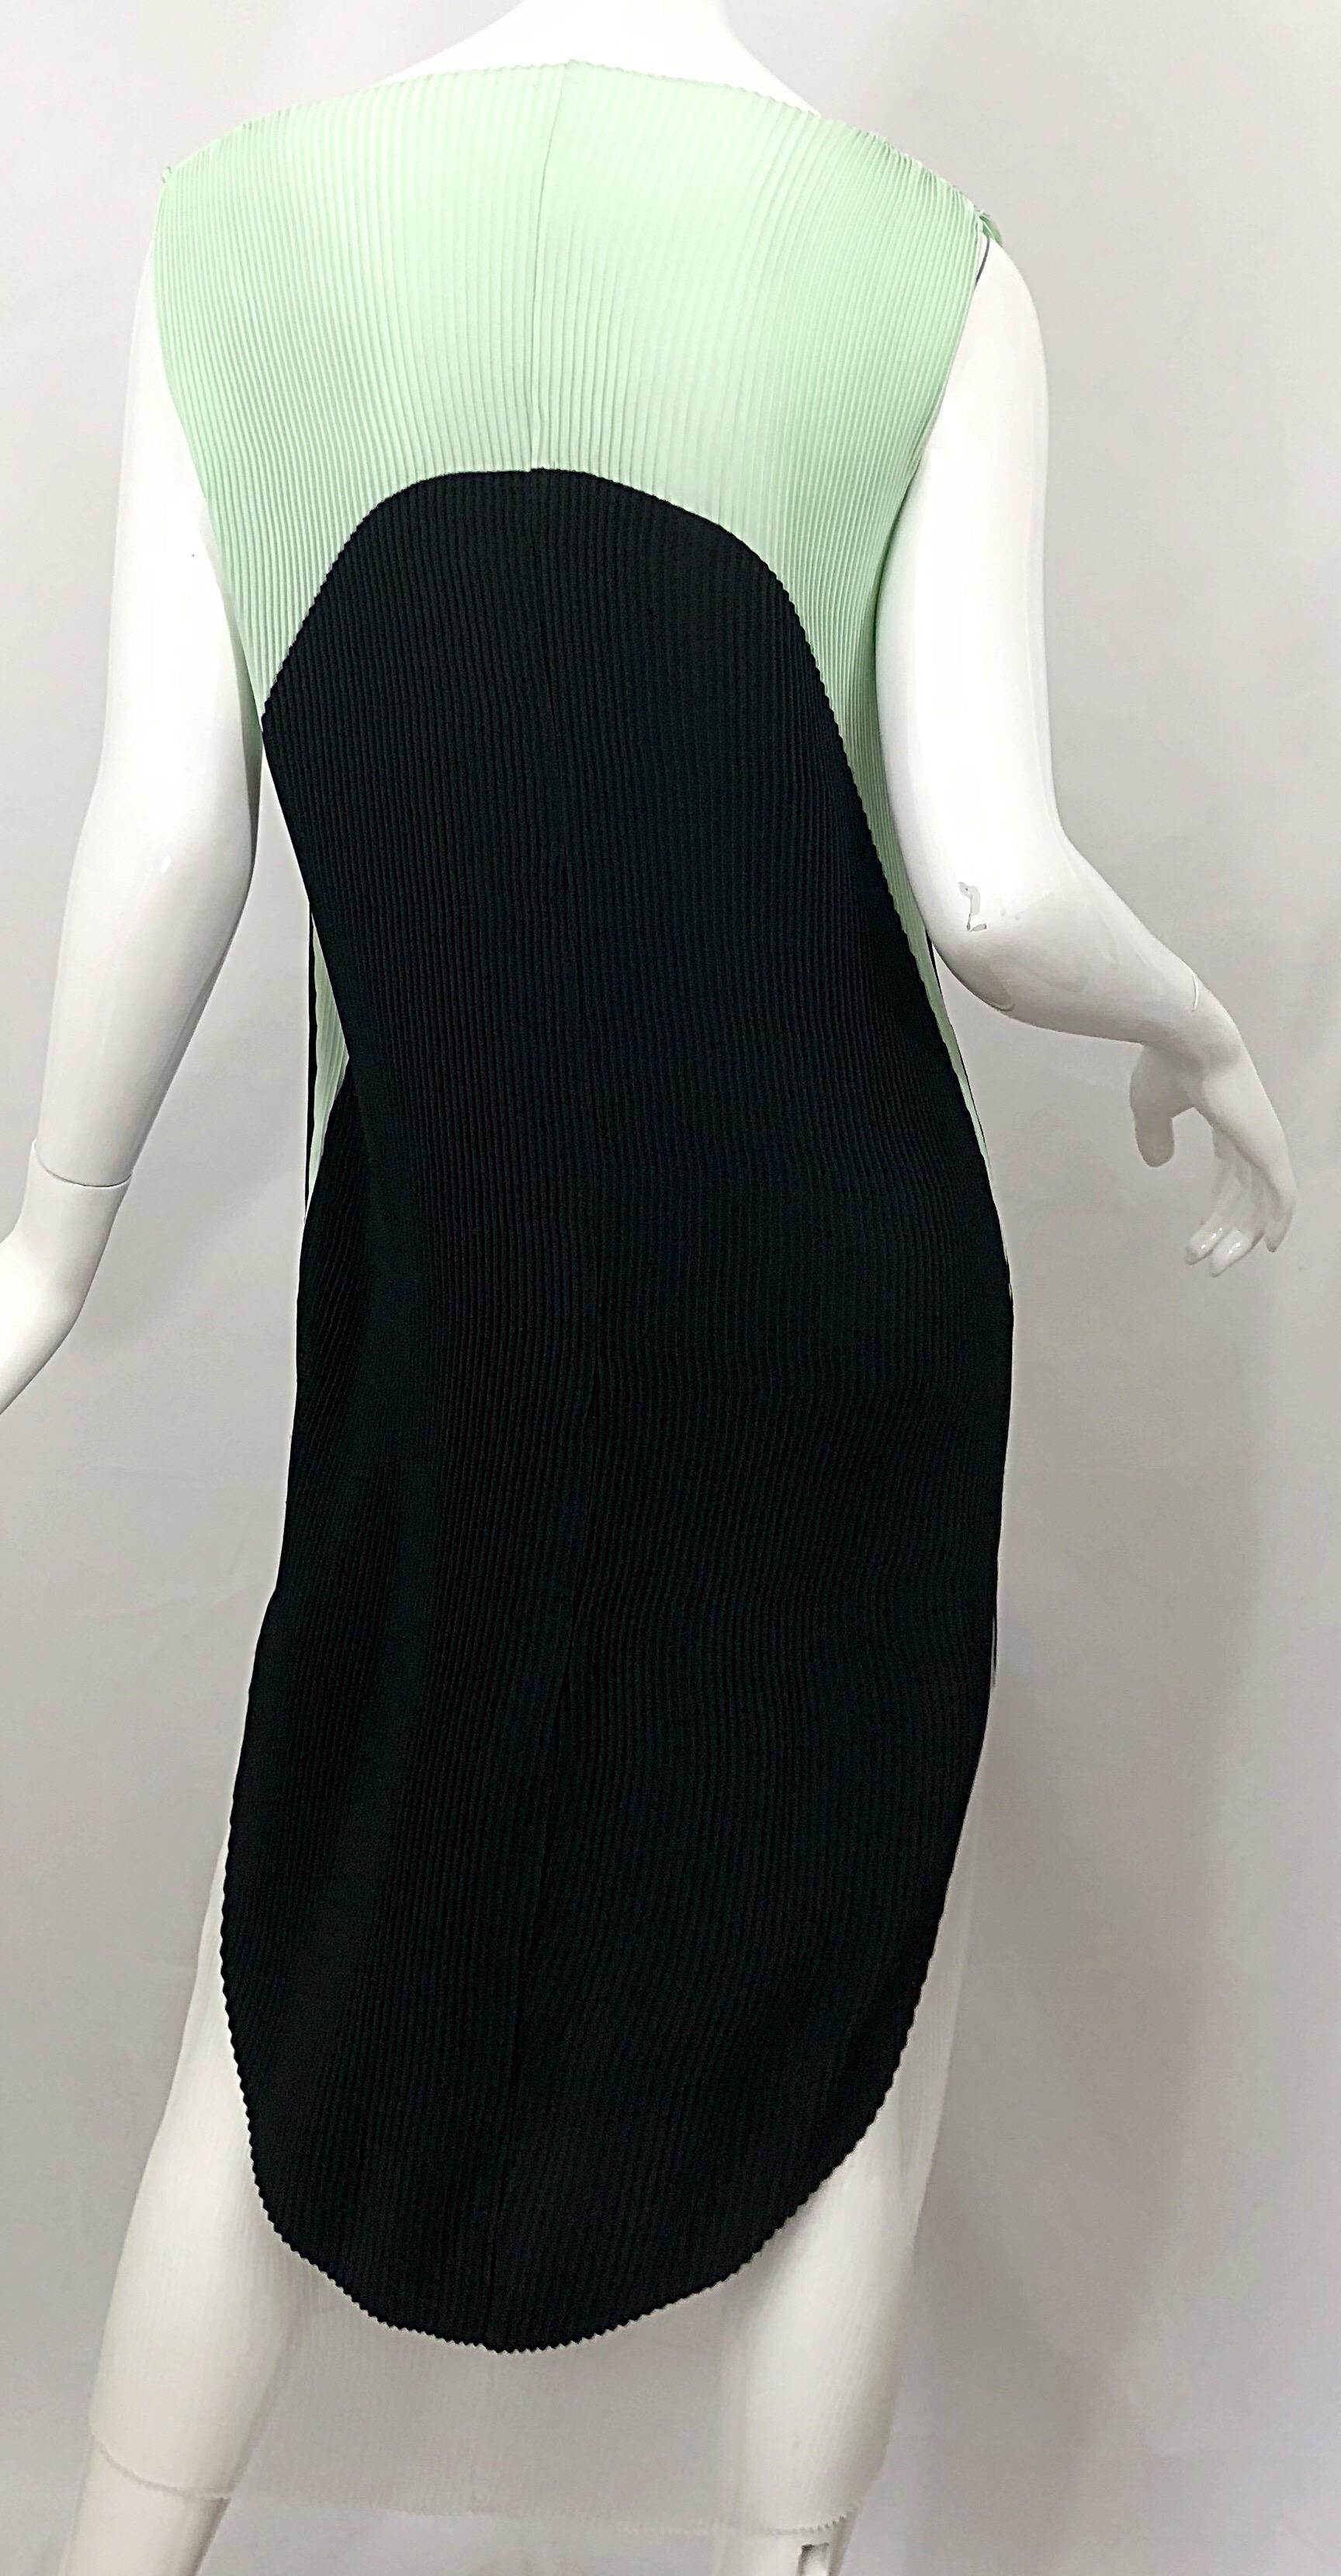 Stella McCartney Spring 2013 Runway Size 44 US 8 - 10 Color Block Pleated Dress For Sale 2